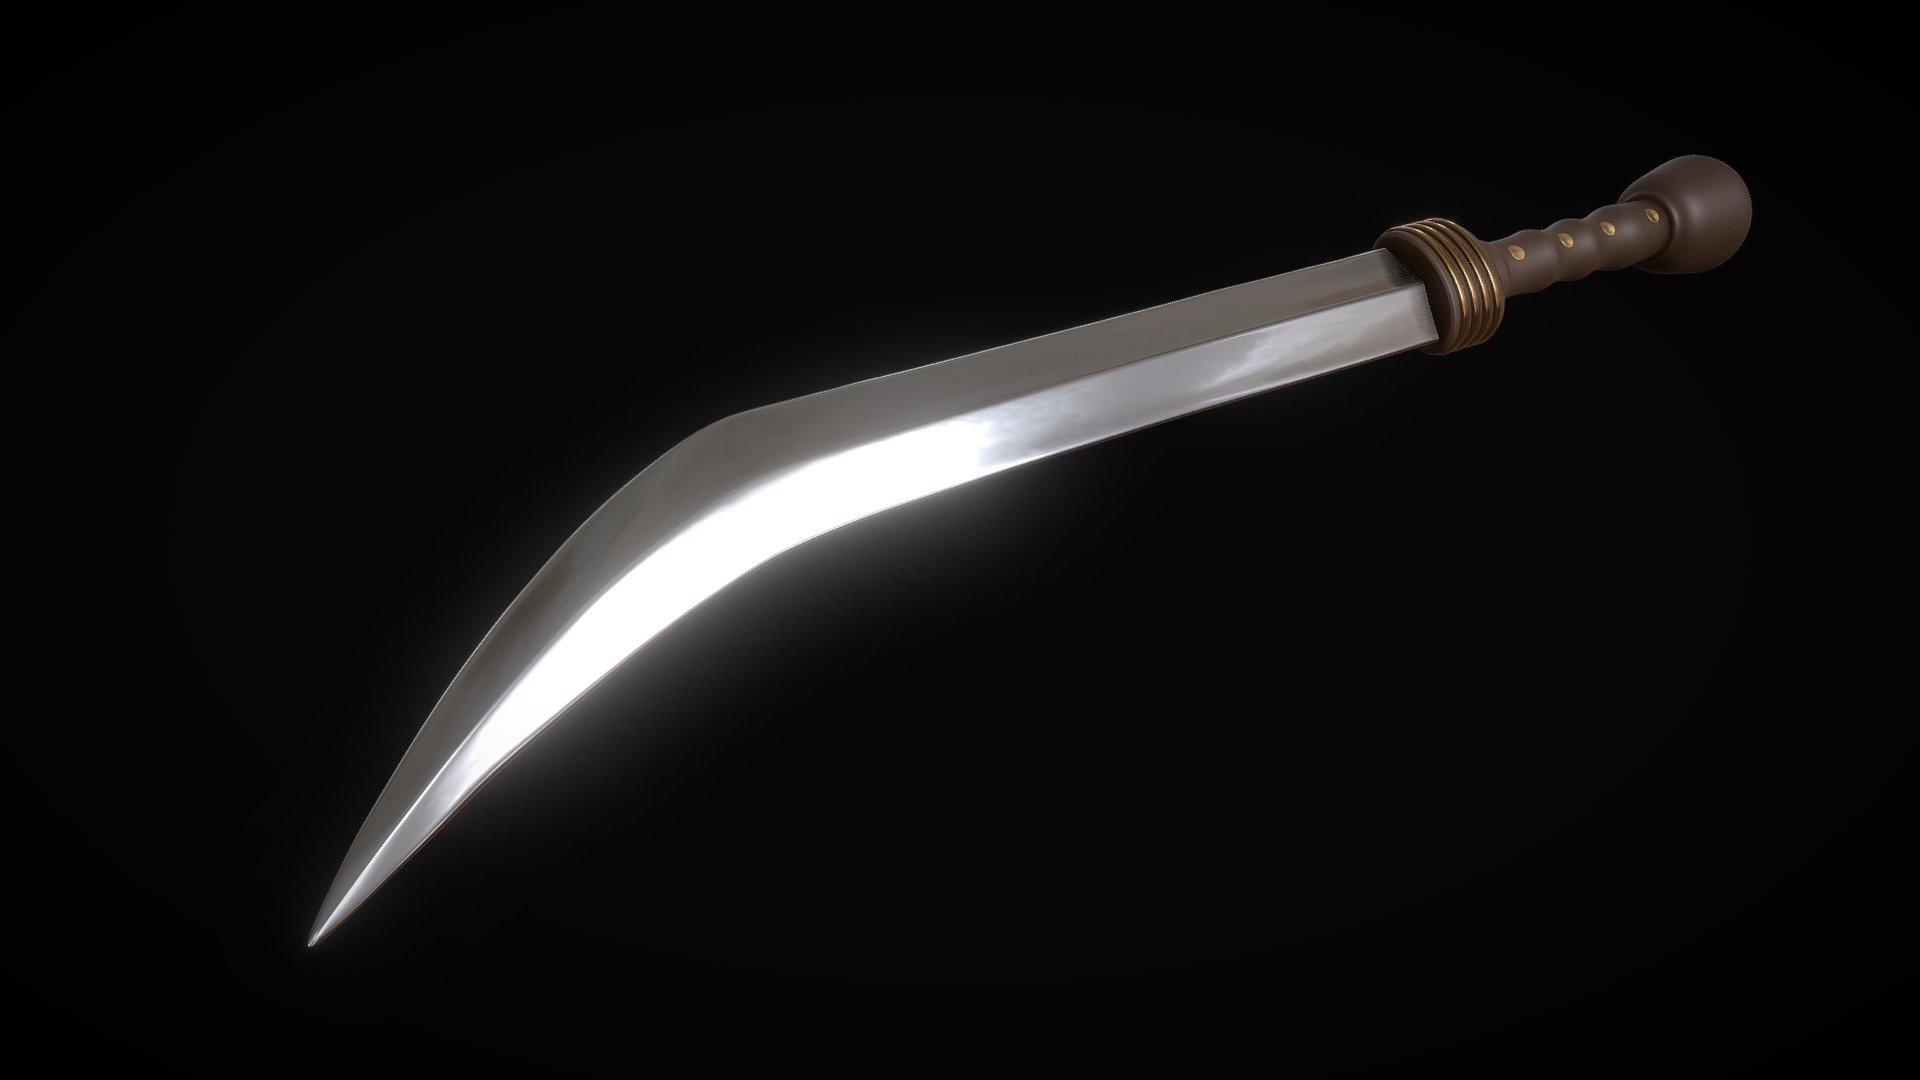 The Sica sword is a unique and distinctive weapon that originates from ancient Thrace, a region in southeastern Europe. It is a curved, single-edged blade that resembles a sickle or a scimitar. The Sica sword typically has a short, thick blade with a pronounced curve that starts near the hilt and extends towards the tip. The blade is usually sharpened on the inner edge, which allows for more efficient slashing and cutting motions.

The Sica sword features a hilt that is typically made of wood, bone, or metal and is designed to provide a comfortable grip for the wielder. The hilt may also have decorative elements such as engravings or carvings, showcasing the craftsmanship of the weapon. The pommel, located at the end of the hilt, serves as a counterbalance to the blade, helping to improve the weapon's balance and handling.

Highpoly.

Enjoy! :) - Sica - Buy Royalty Free 3D model by Omassyx 3d model